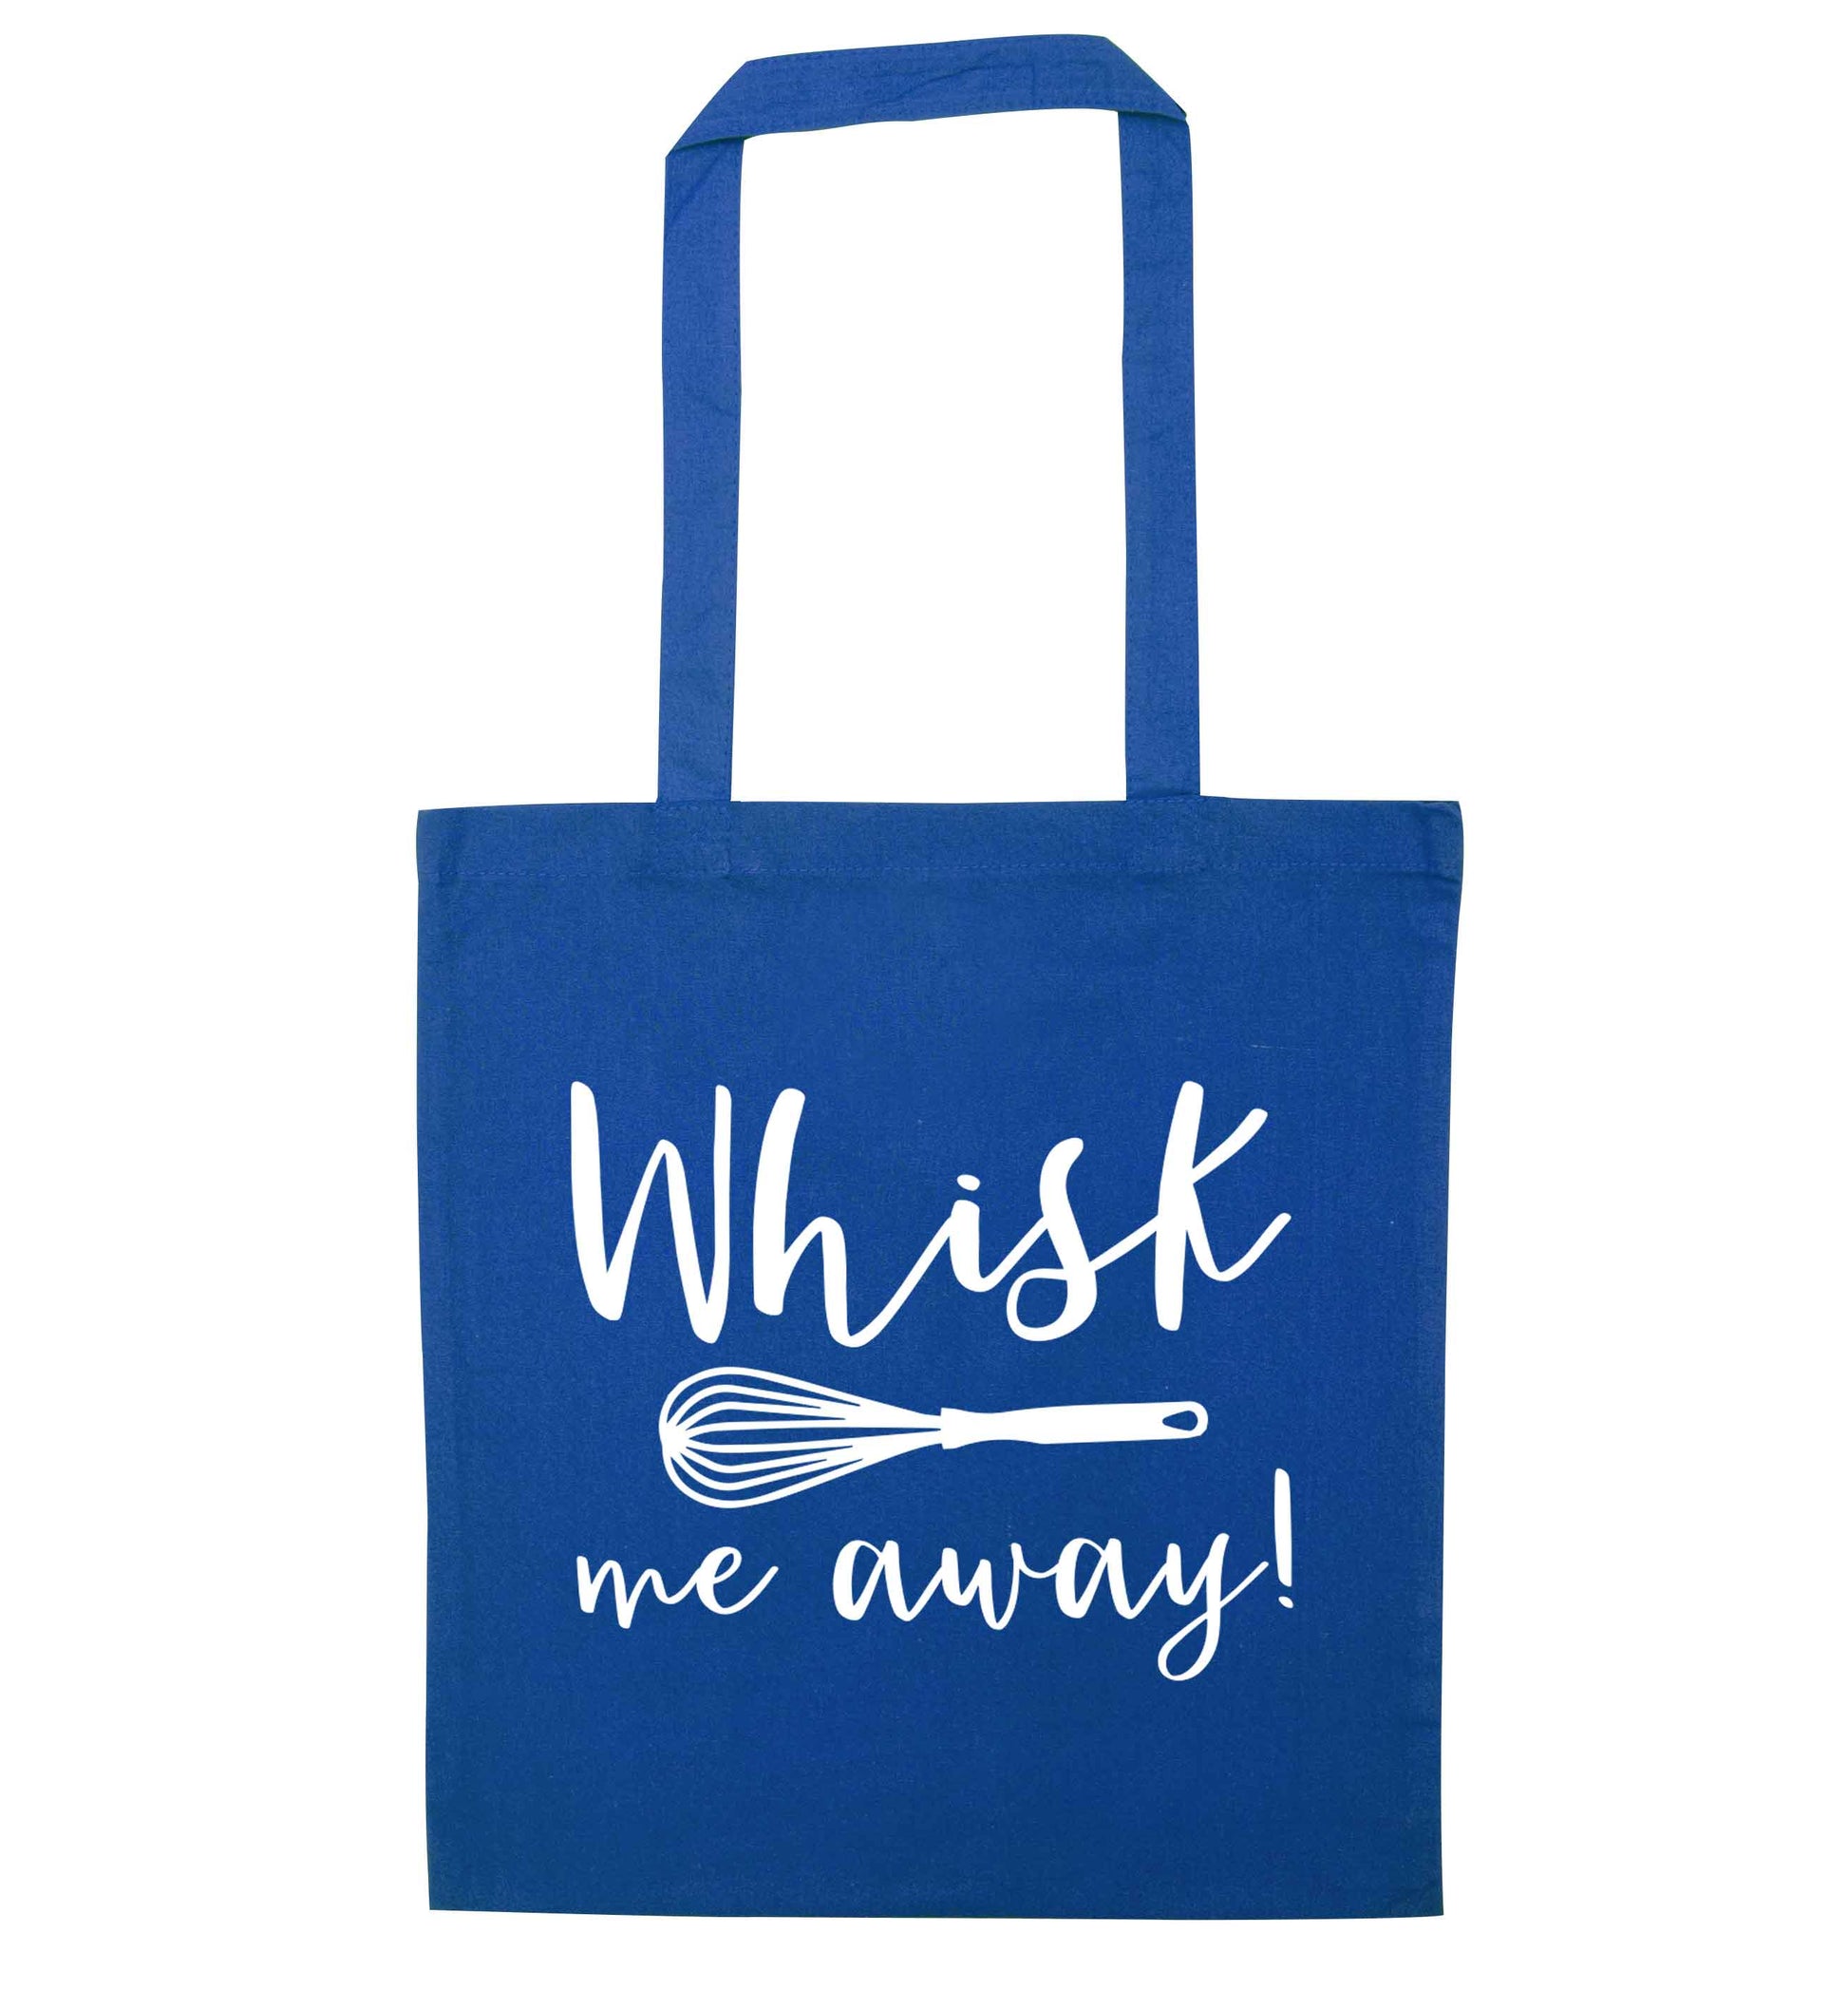 Whisk me away blue tote bag